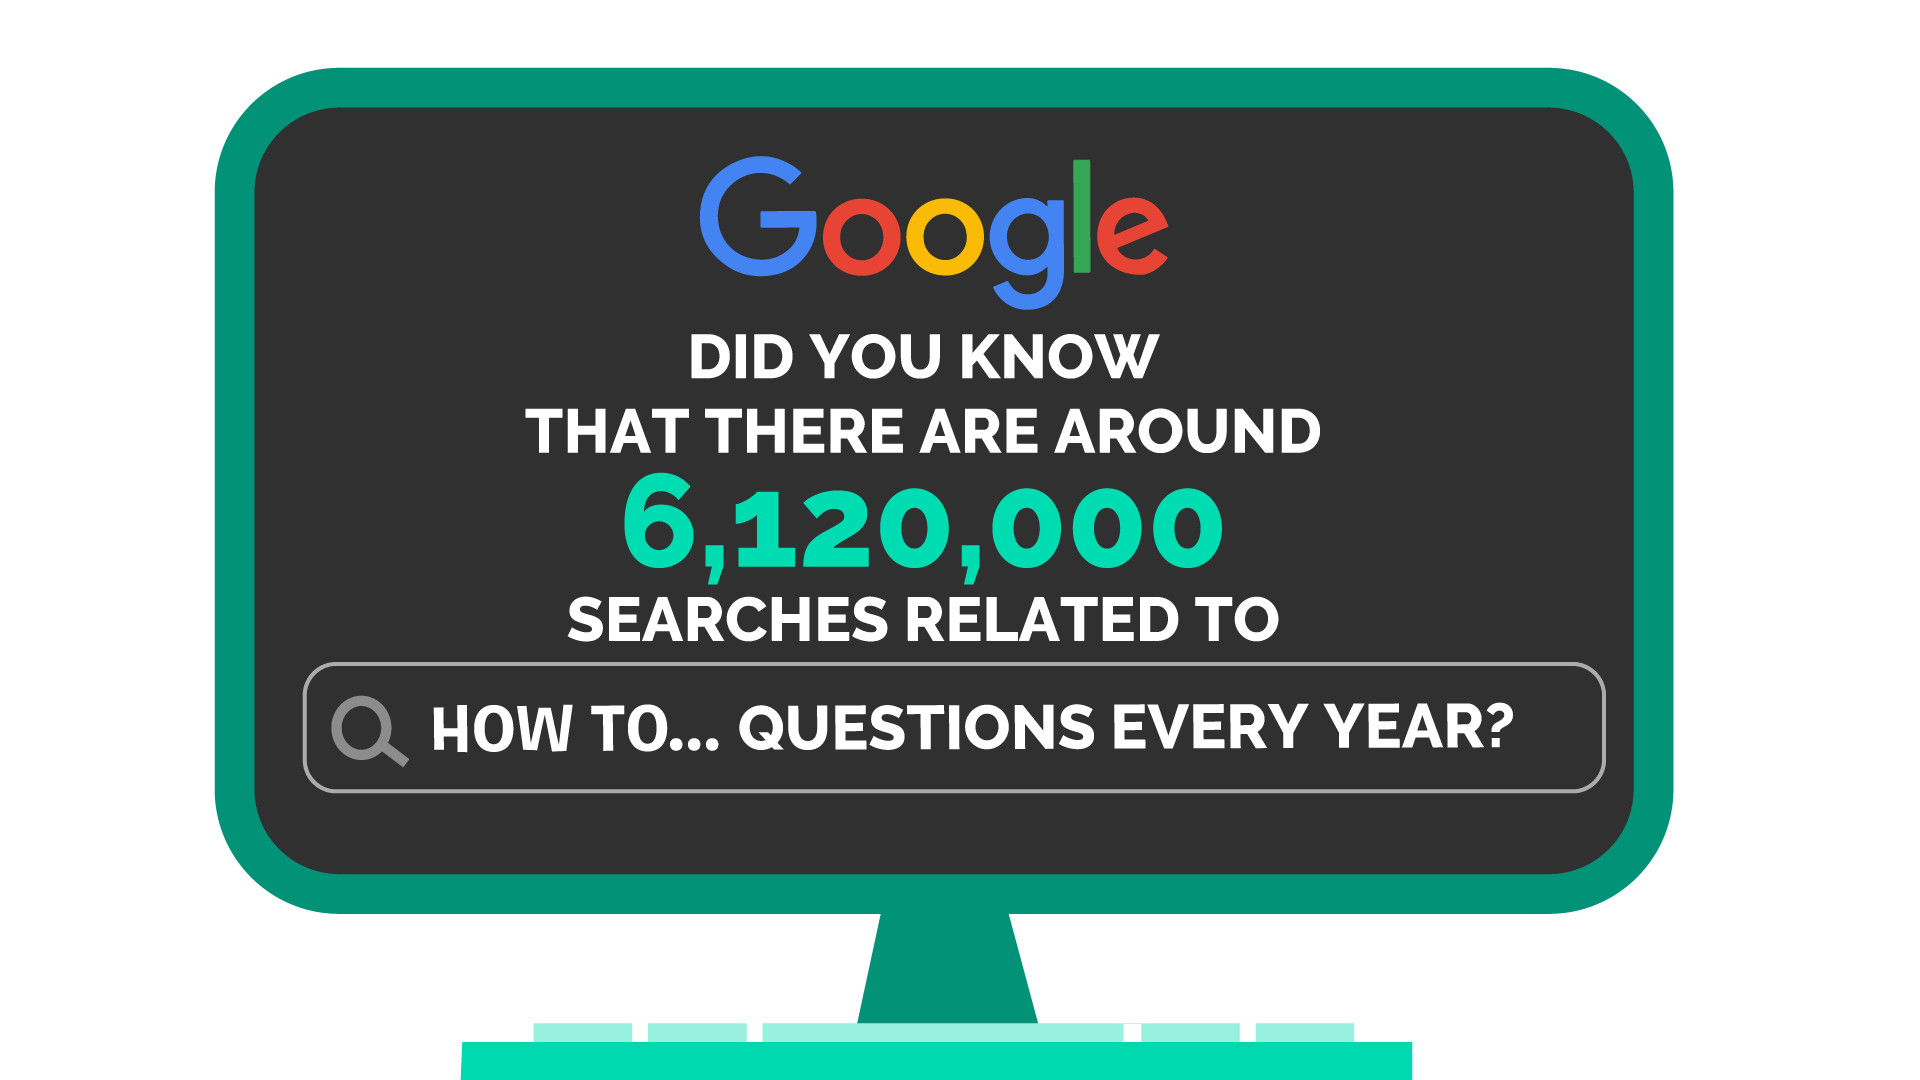 Google search terms - over 6 million how to questions each year